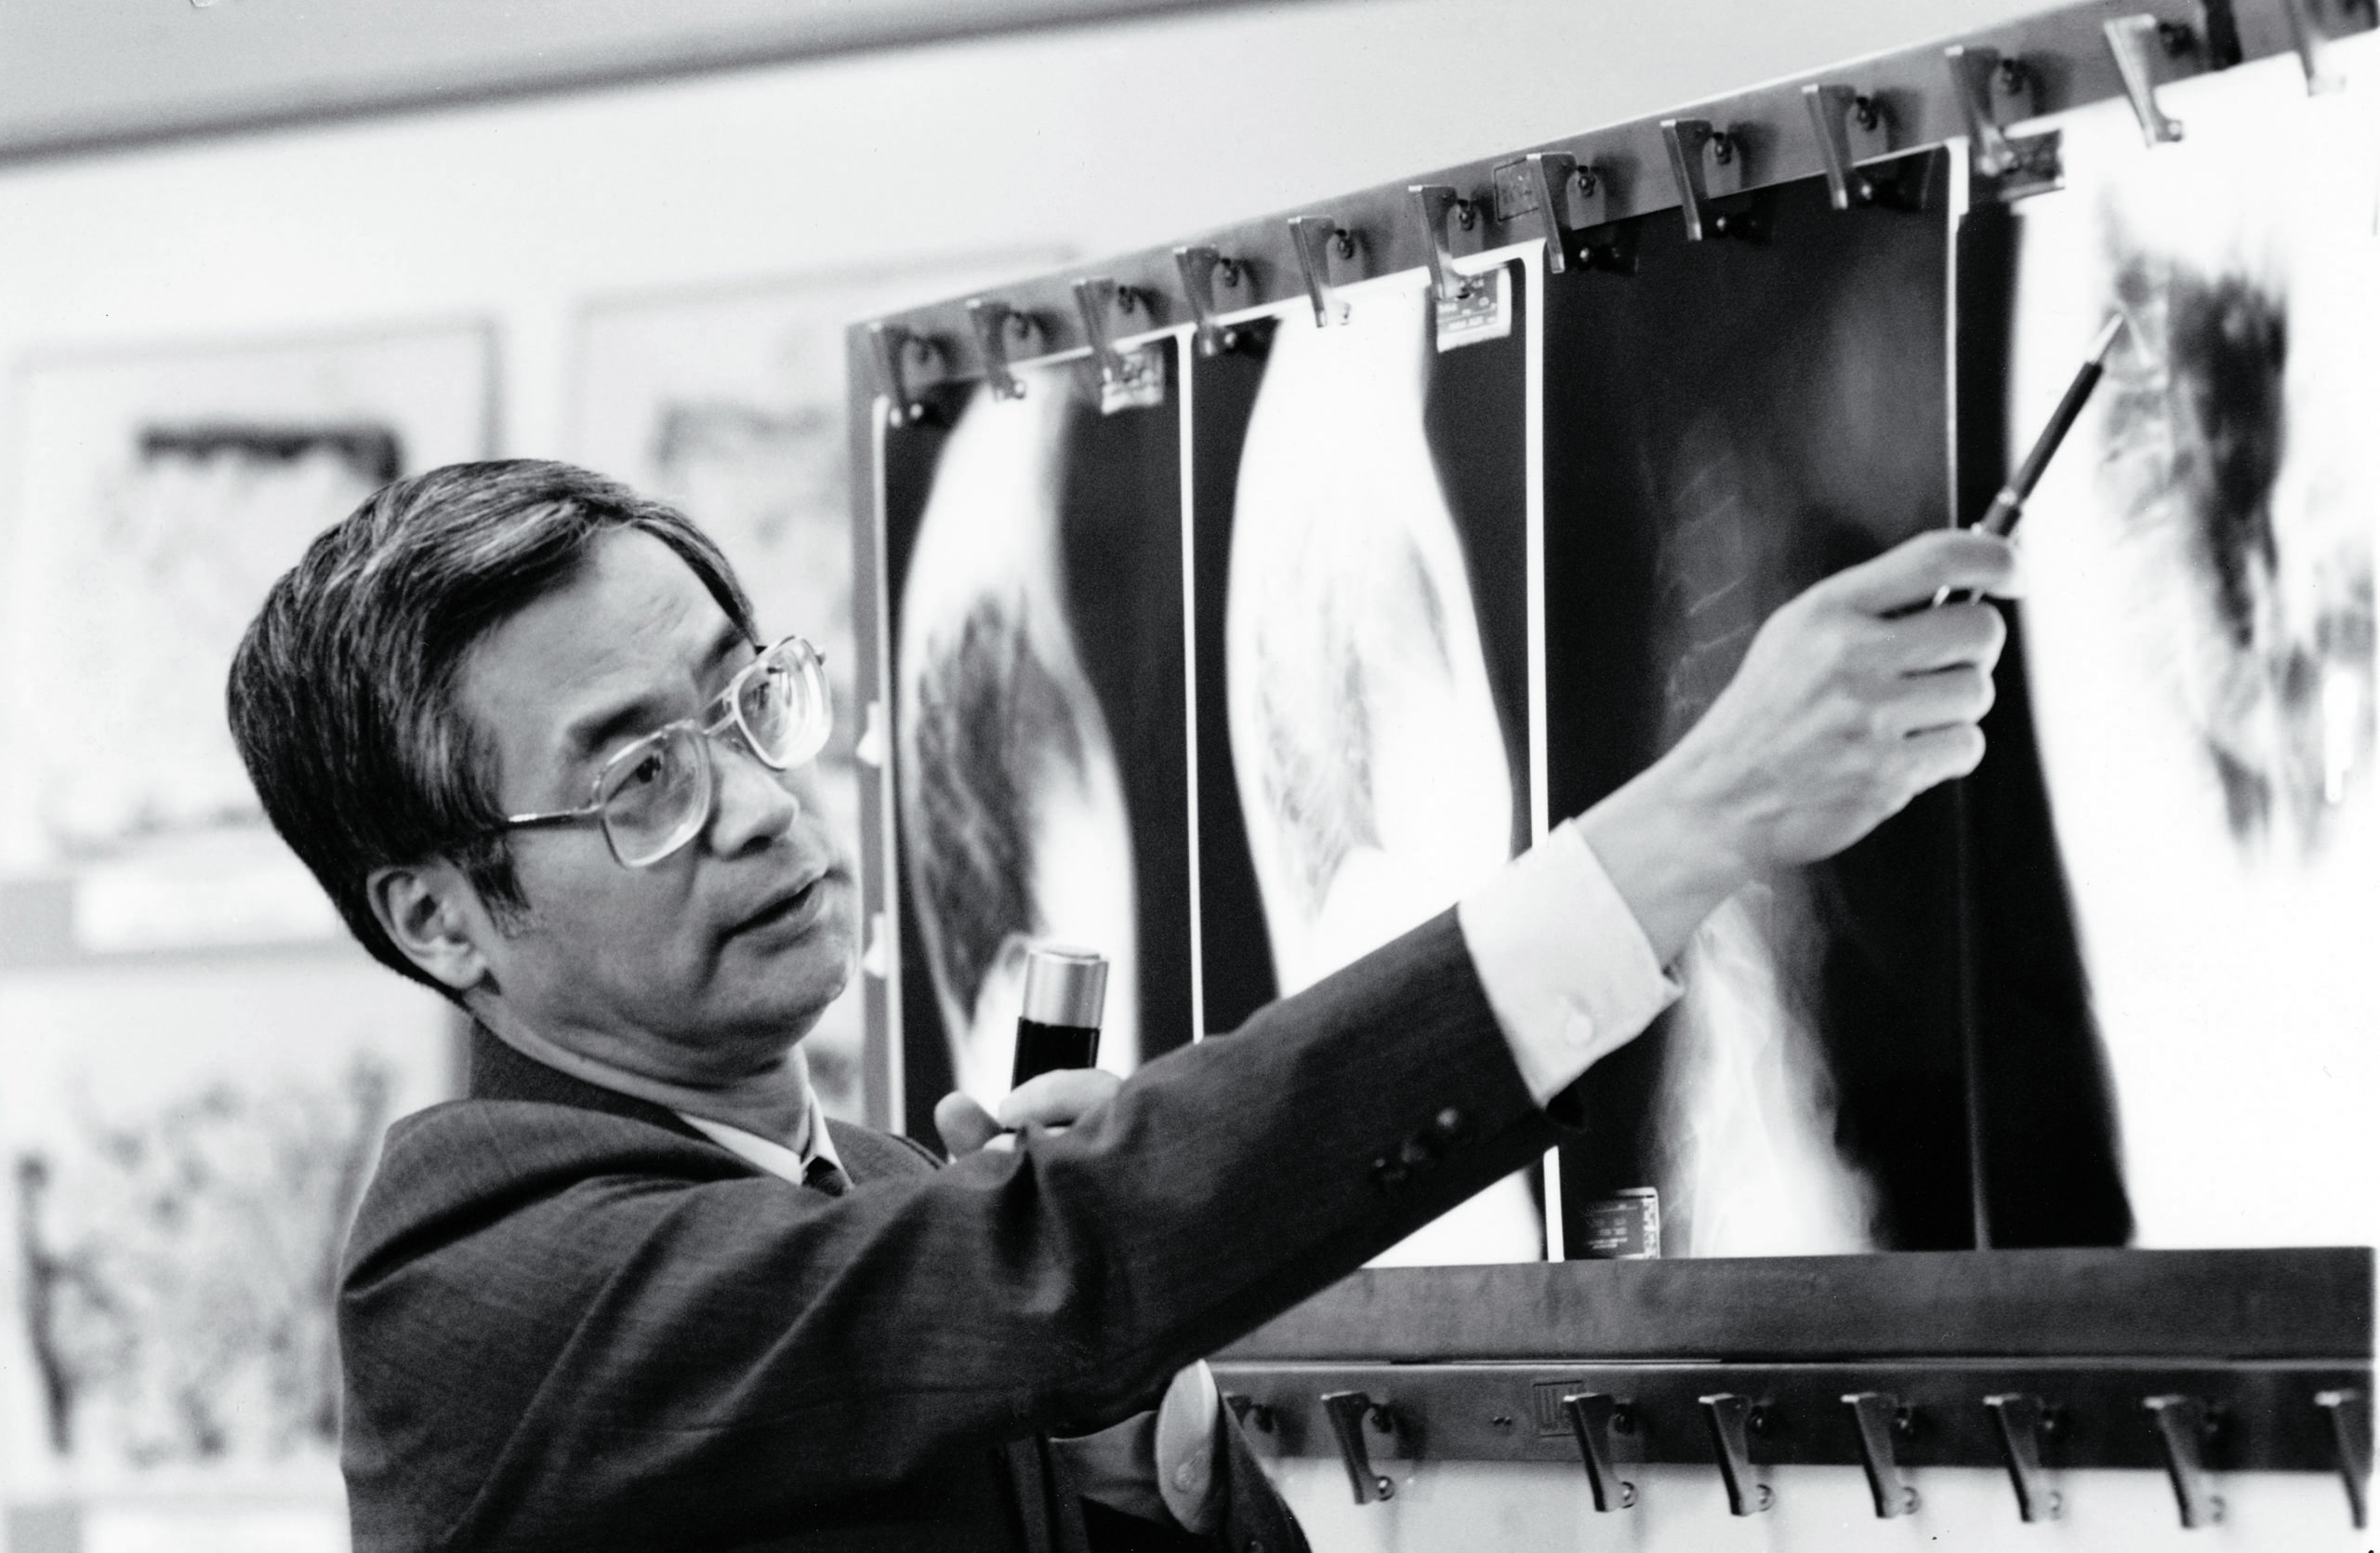 Black and white photo of man in front of an x-ray picture